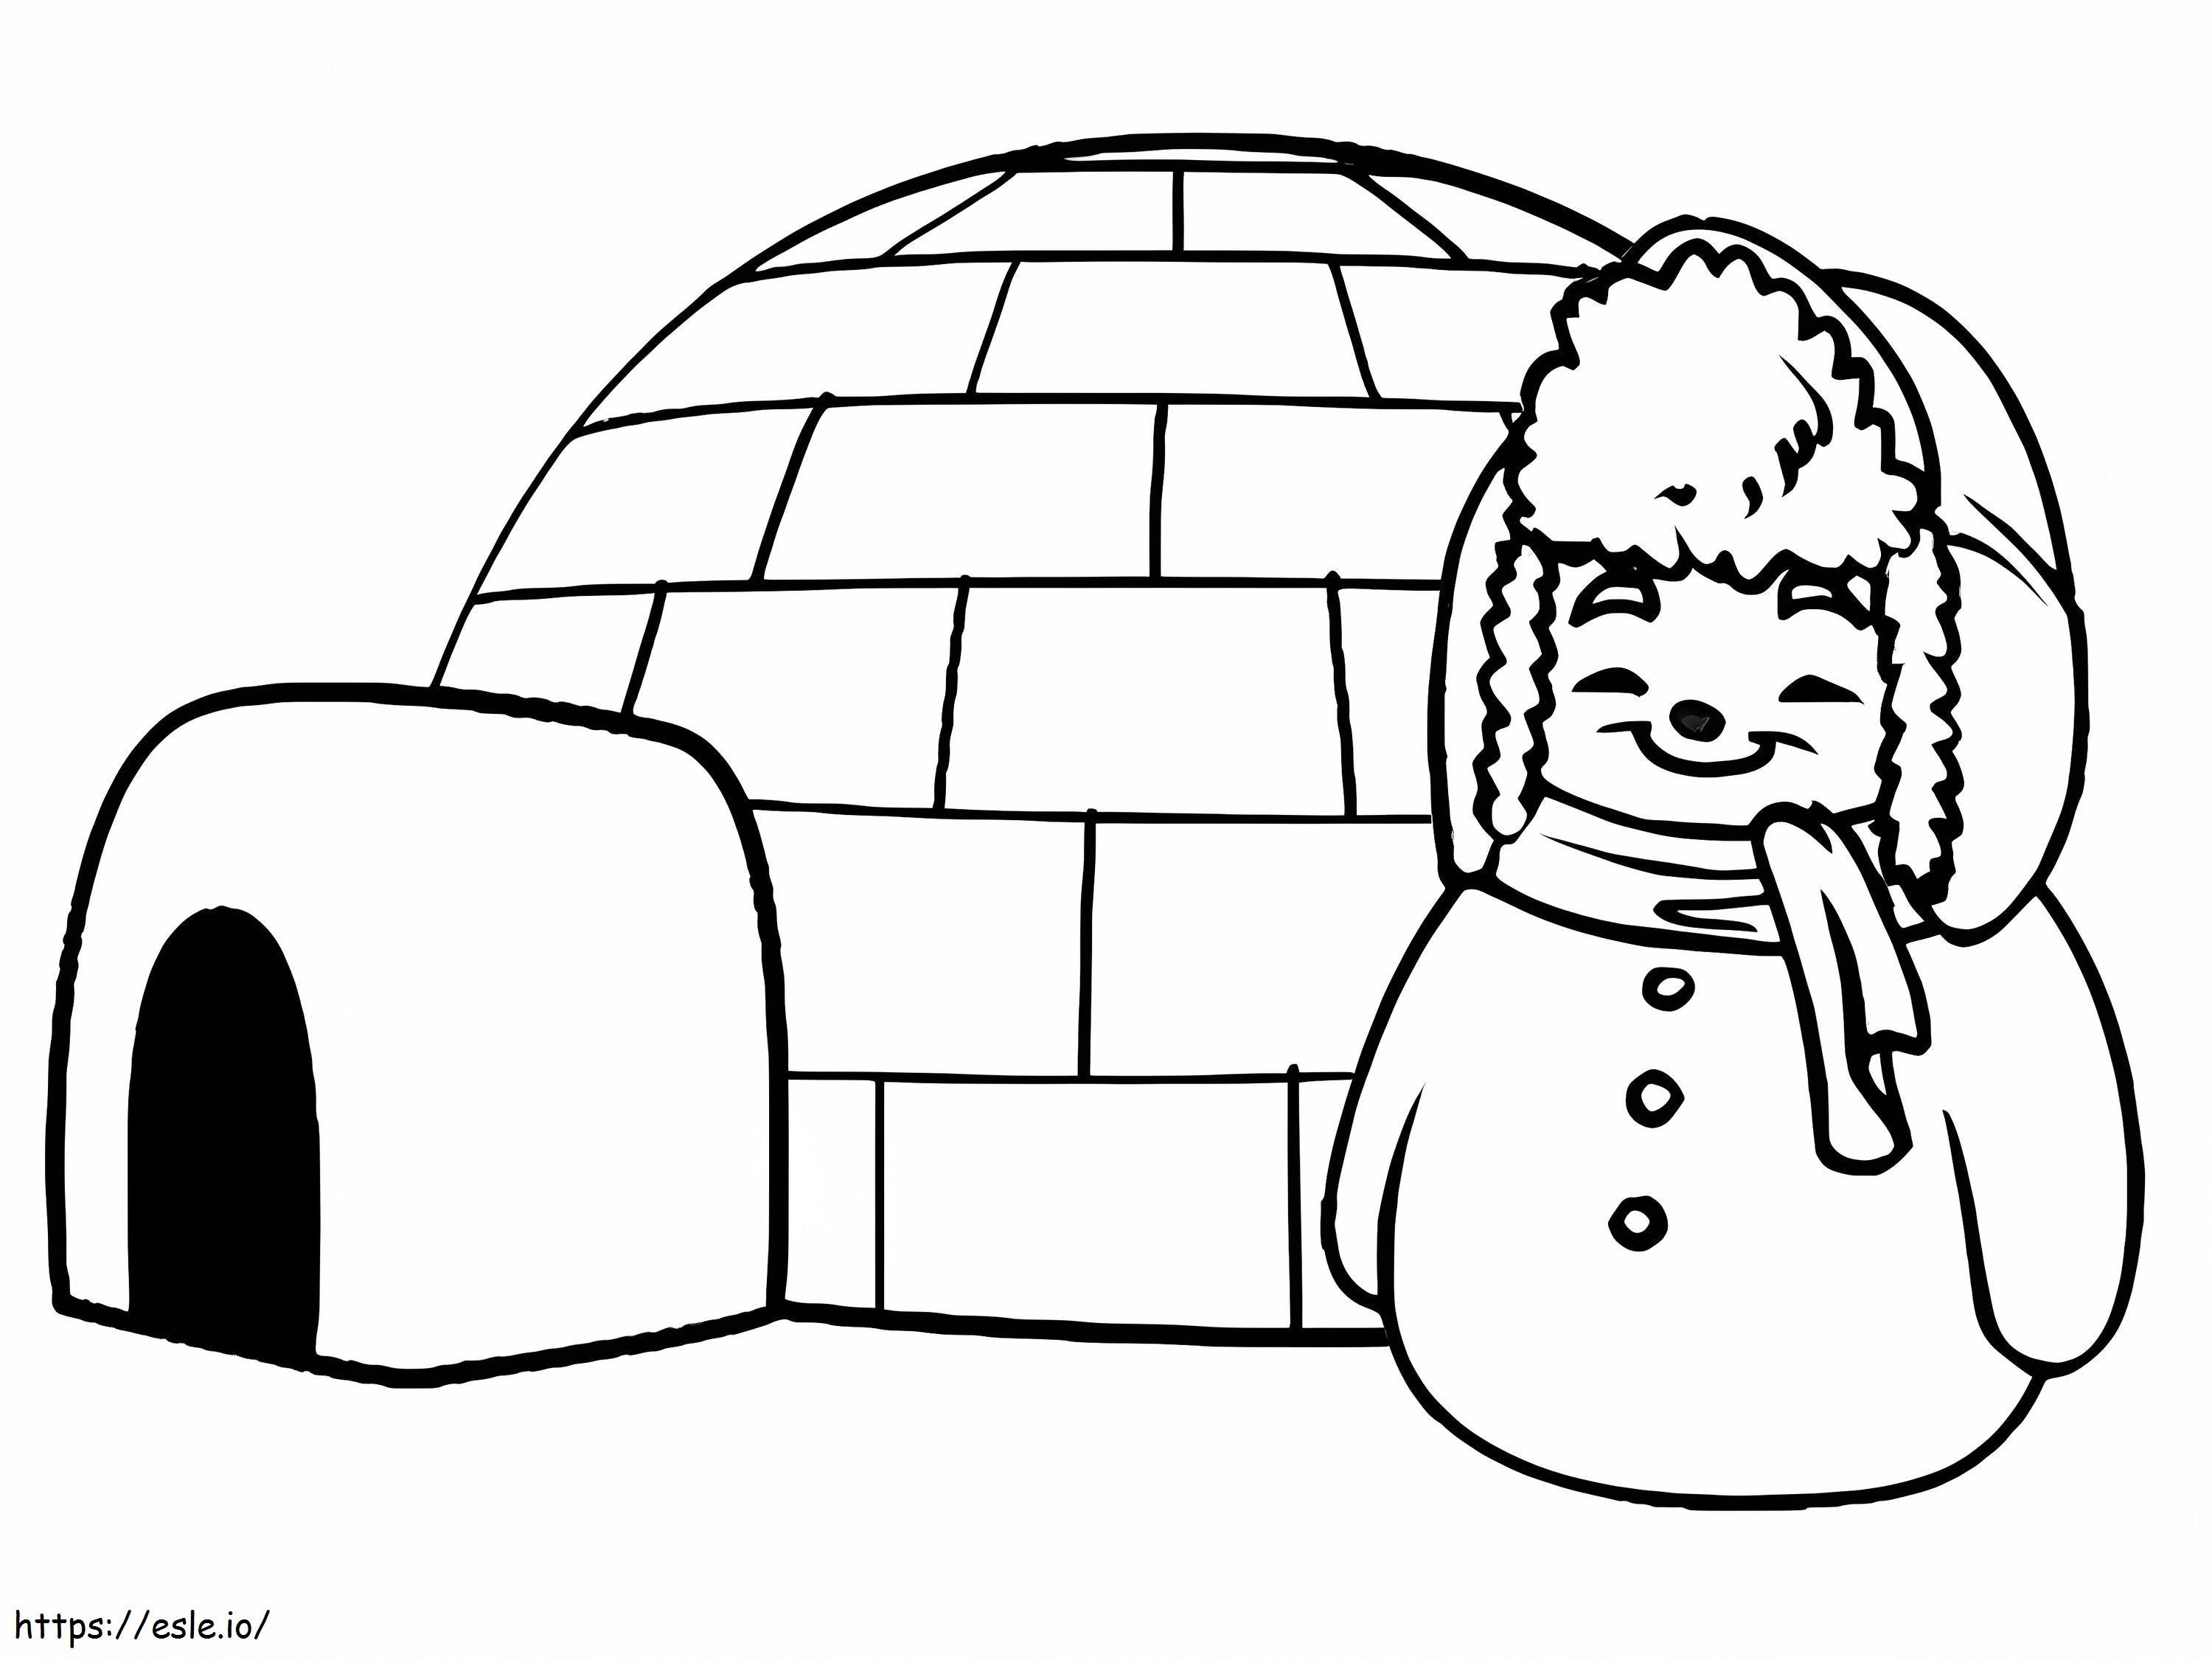 Igloo And Snowman coloring page